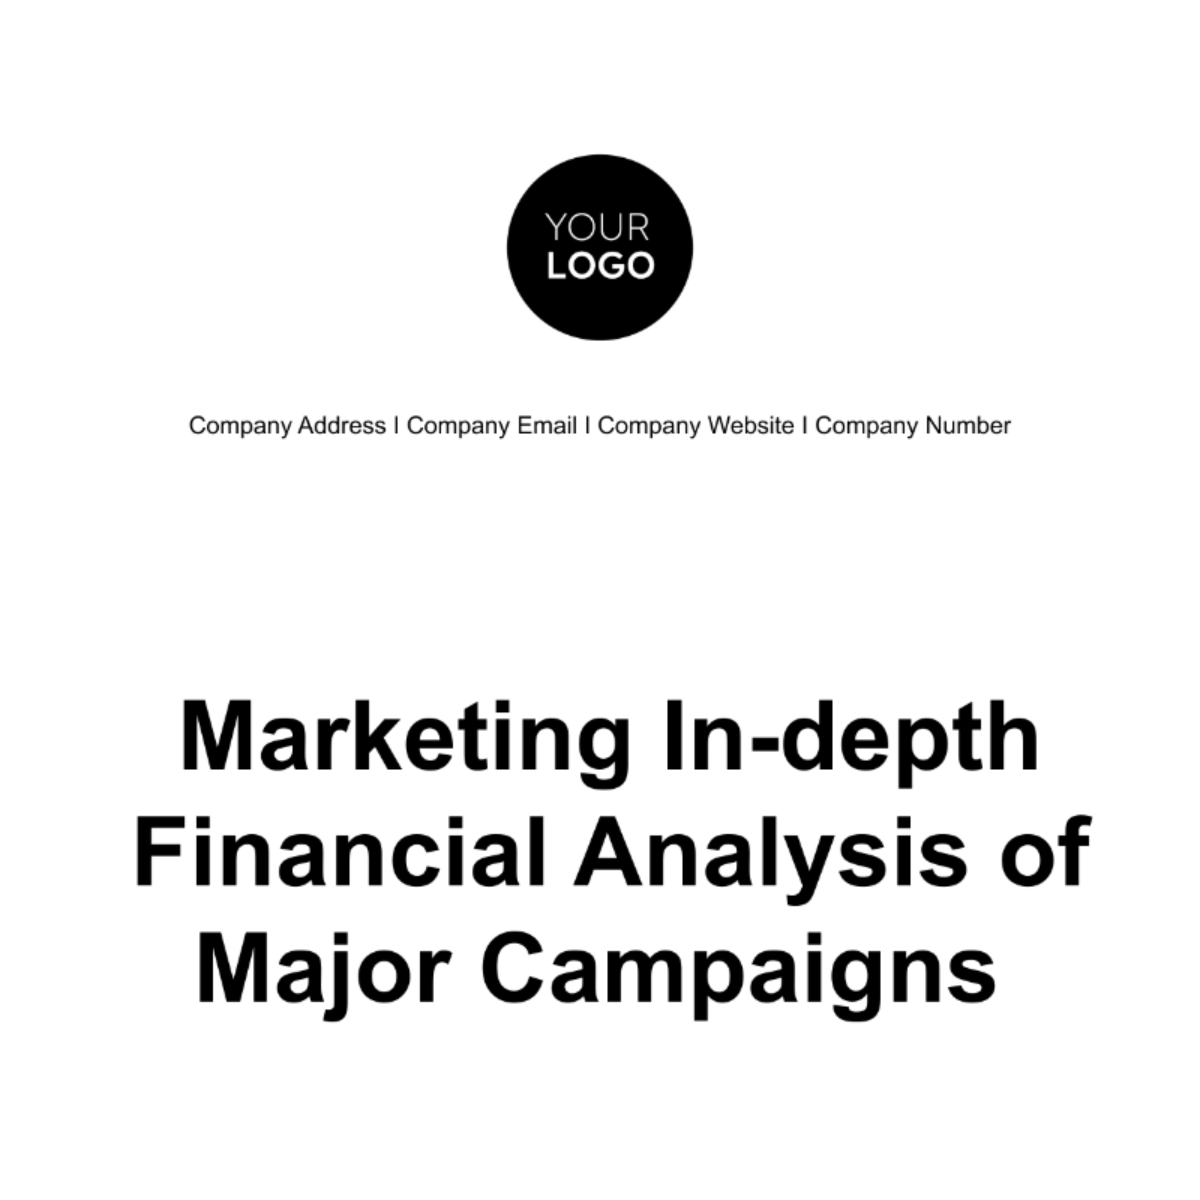 Free Marketing In-depth Financial Analysis of Major Campaigns Template